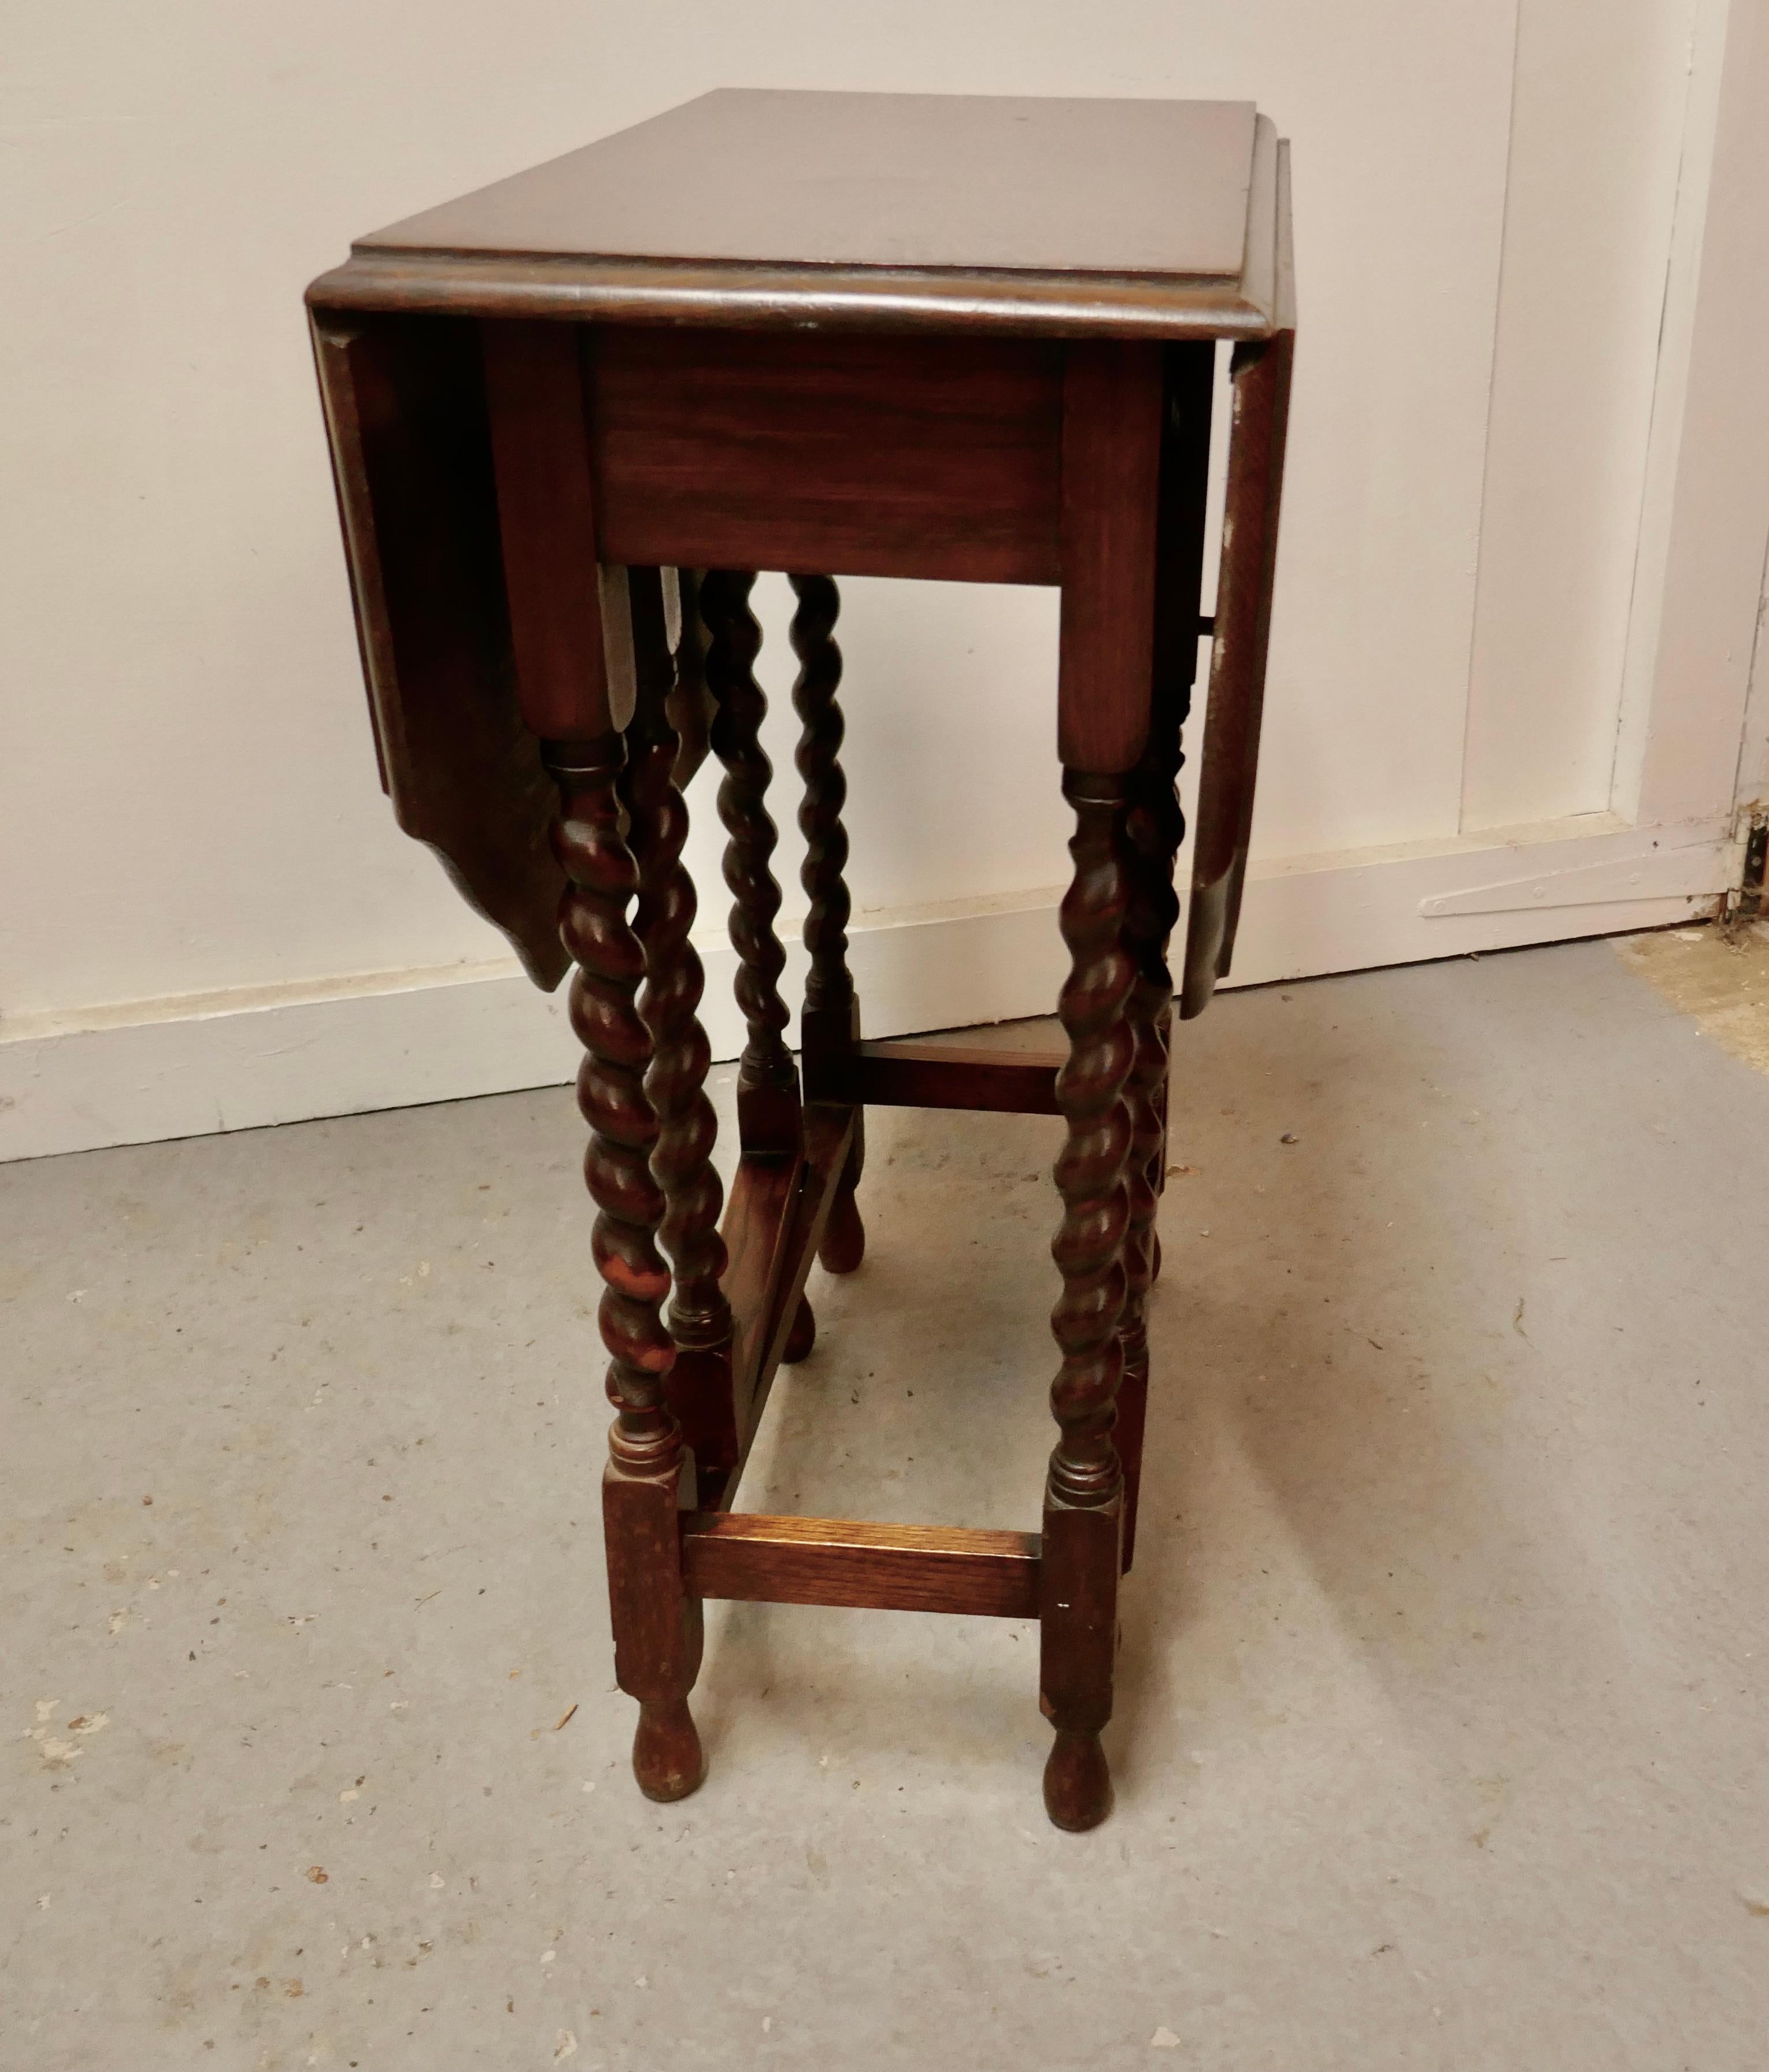 This is a good solid oak Victorian gate leg table


The table is made from solid oak it has elegant crisply turned barley twist legs and oak cross members. The table has a moulded edge and it has a handsome grain 
The table is very attractive,